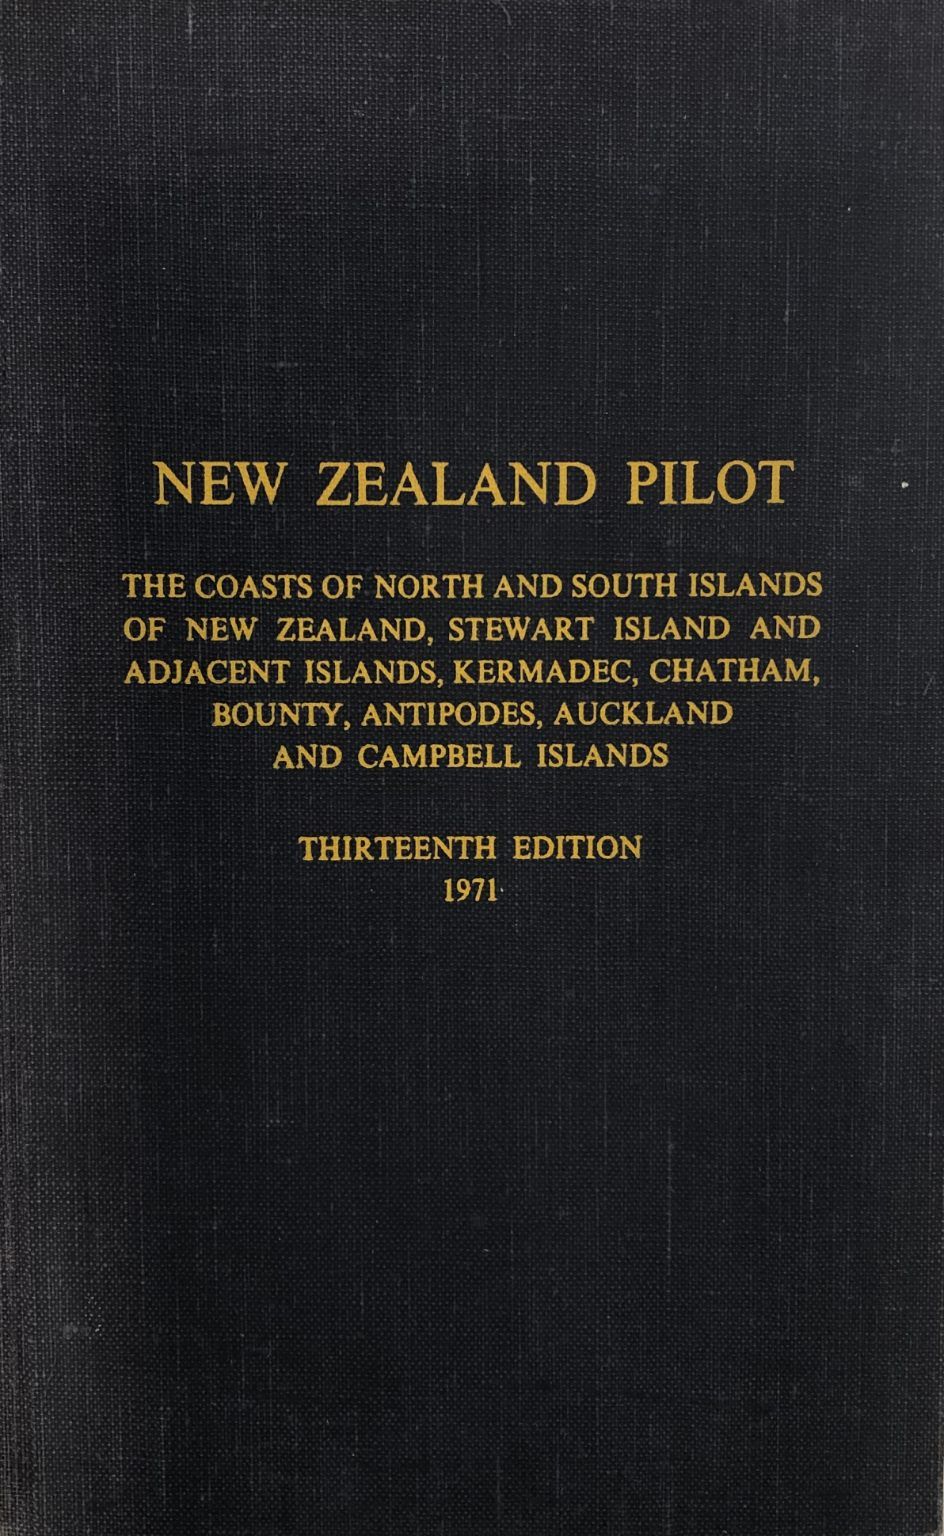 NEW ZEALAND PILOT: The Coasts of North and South Islands of New Zealand